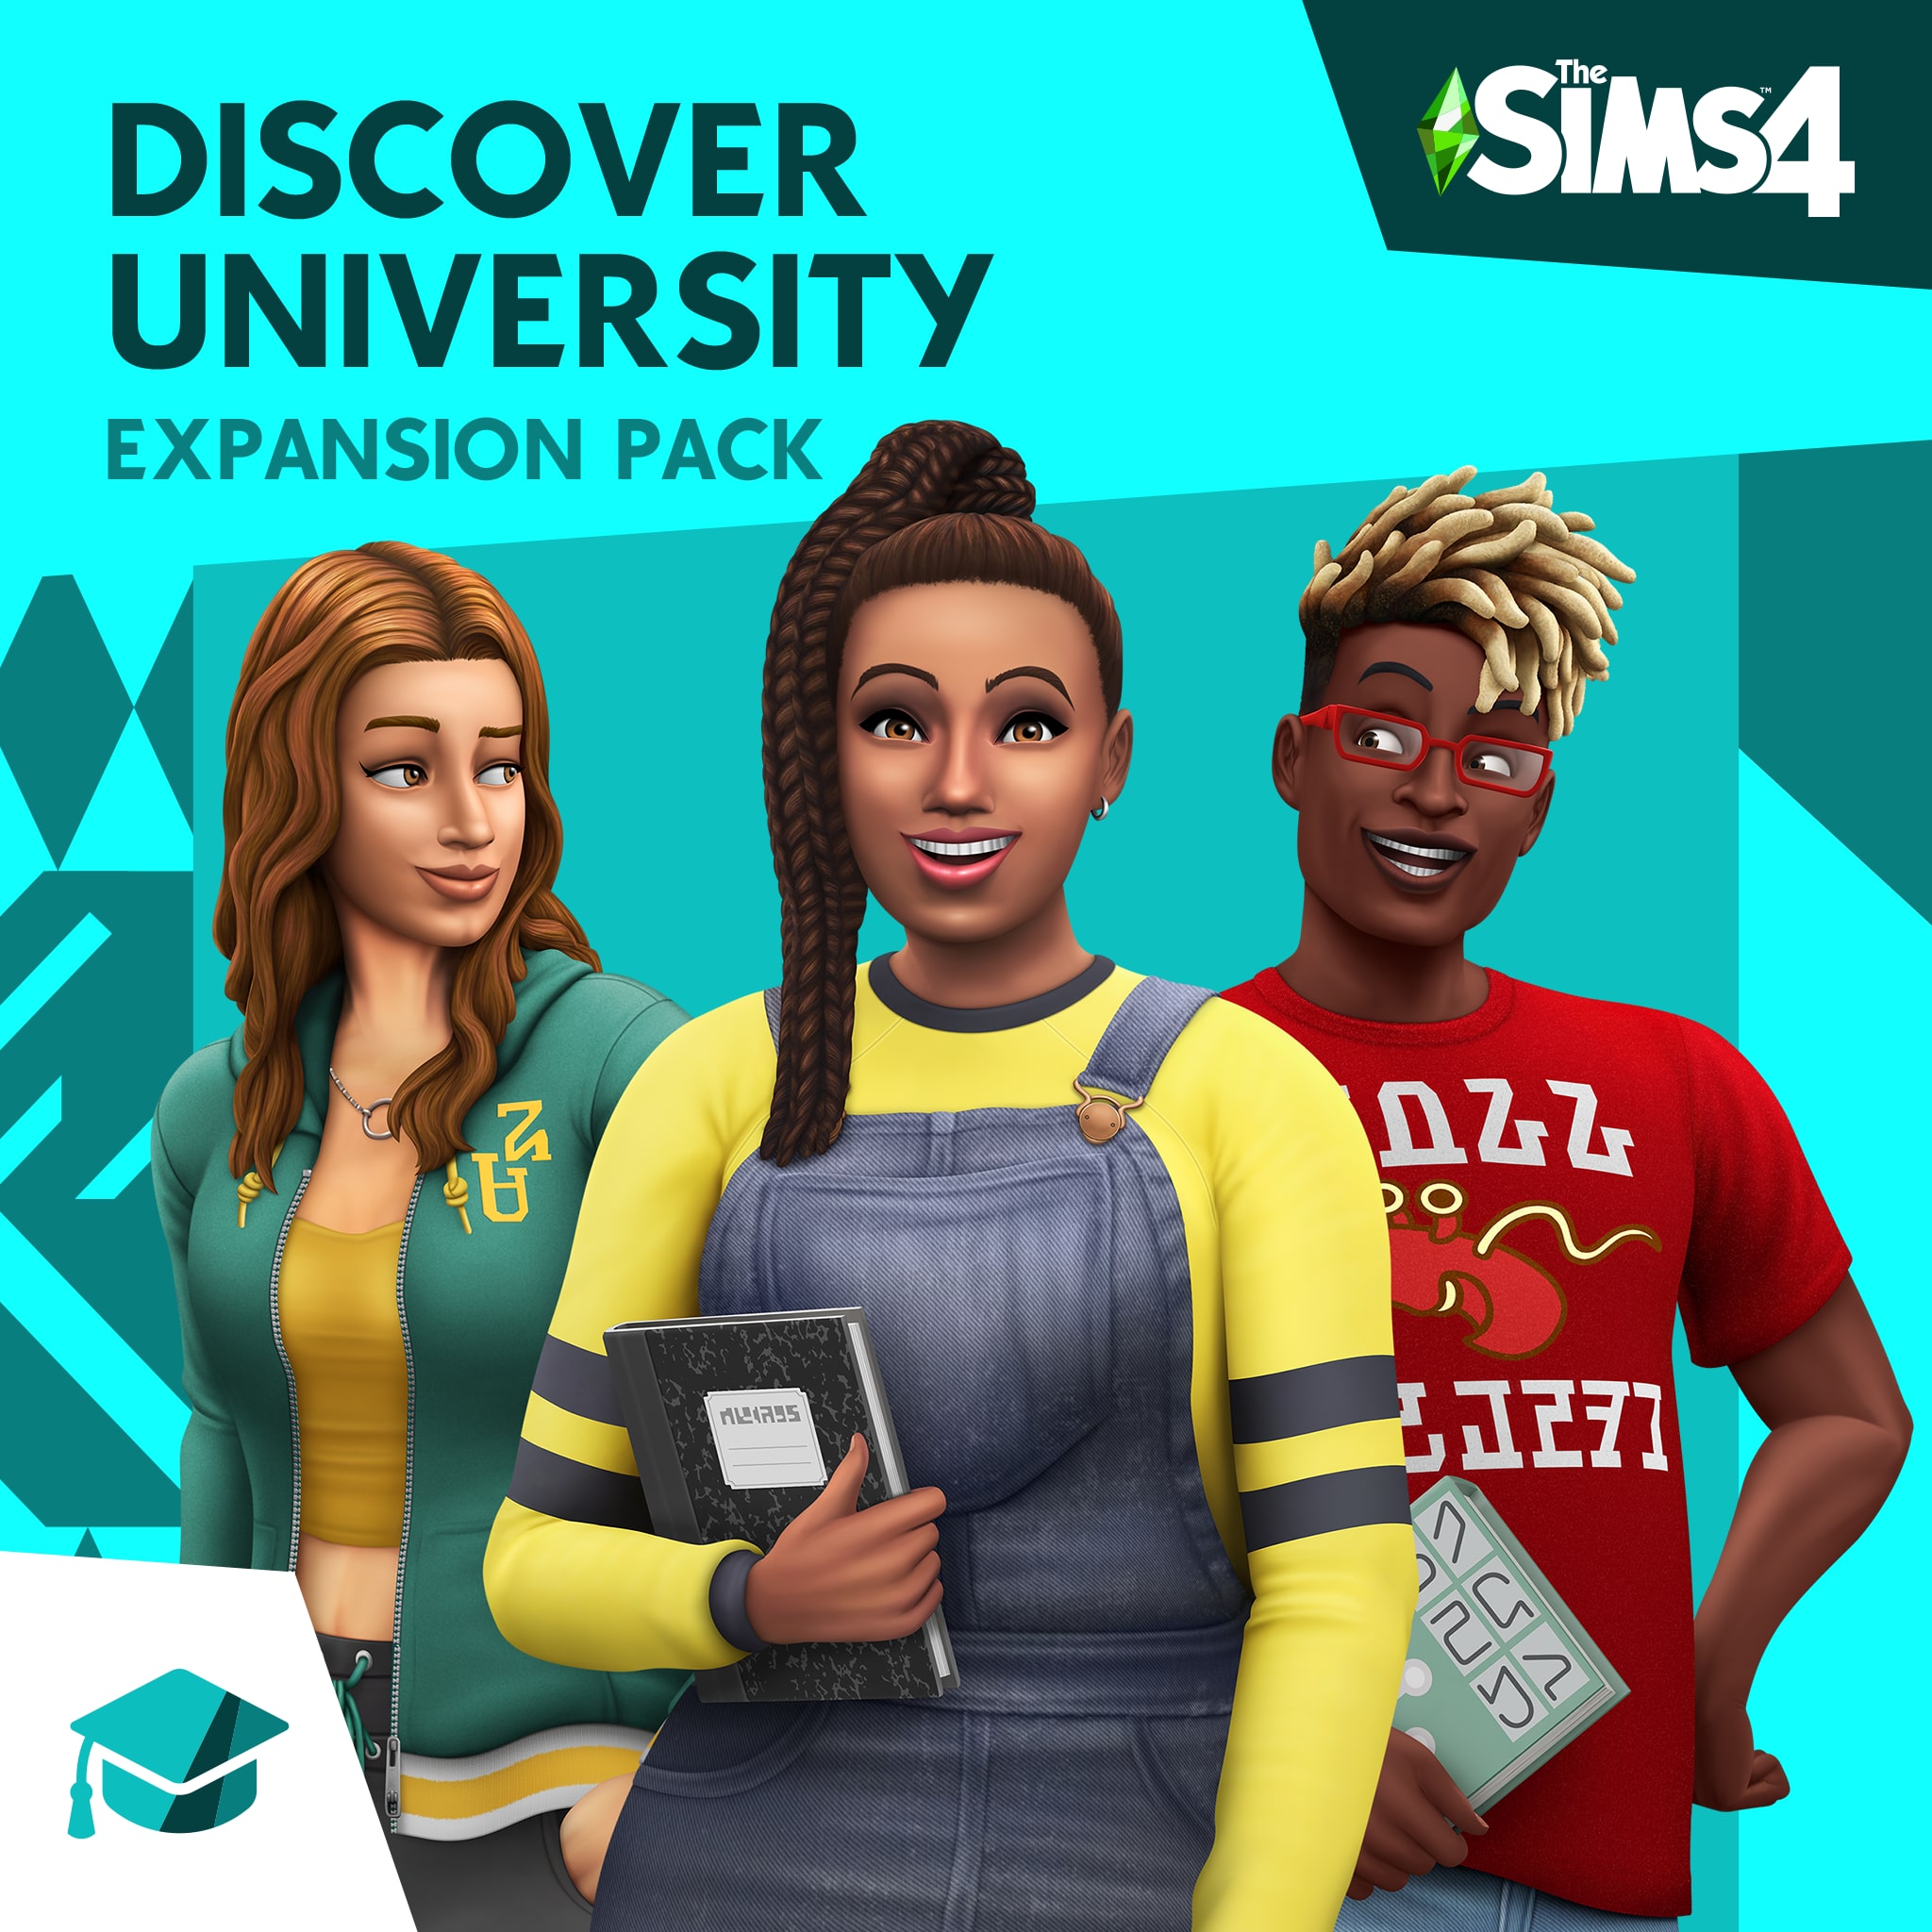 The Sims™ 4 Discover University